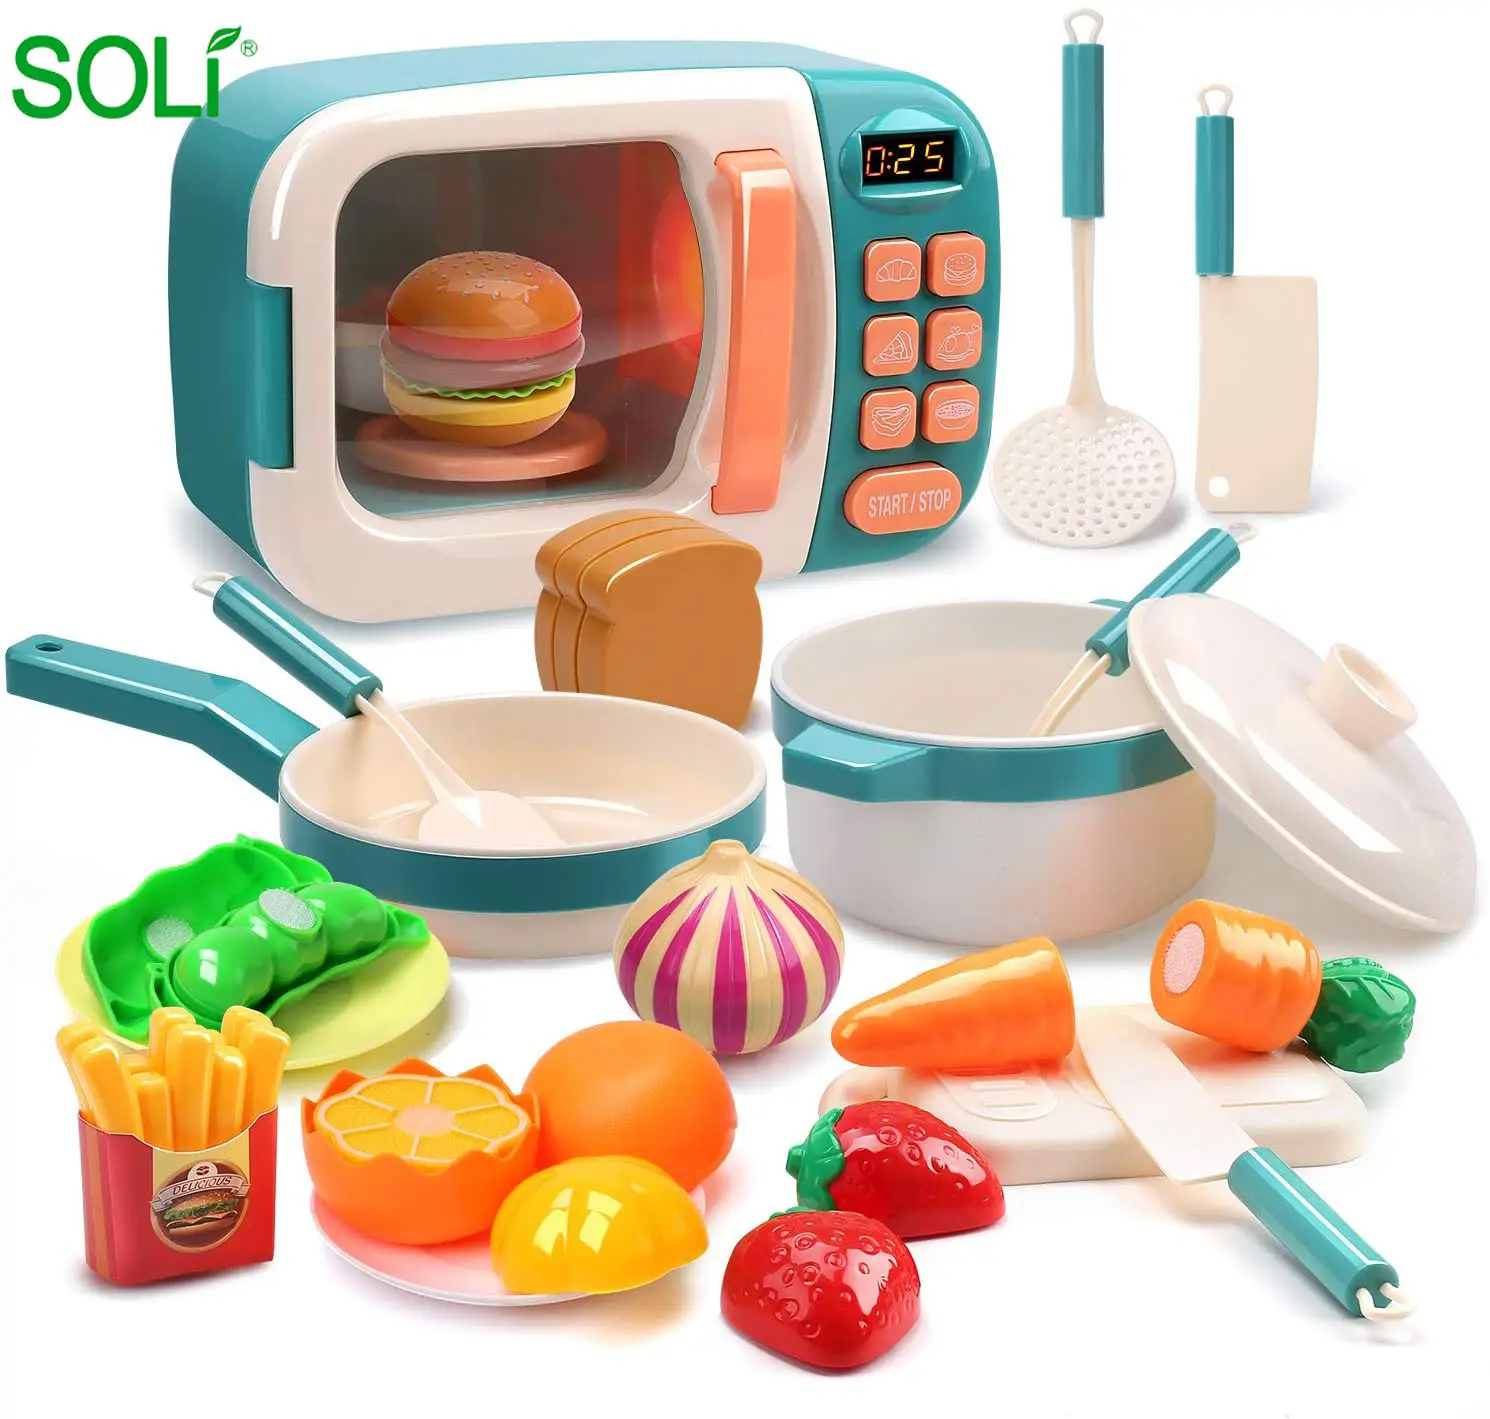 Hot Sell Popular Microwave Toys Kitchen Play Set,Kids Pretend Play Electronic Oven with Play Food,Cookware Pot and Pan Toy Sets